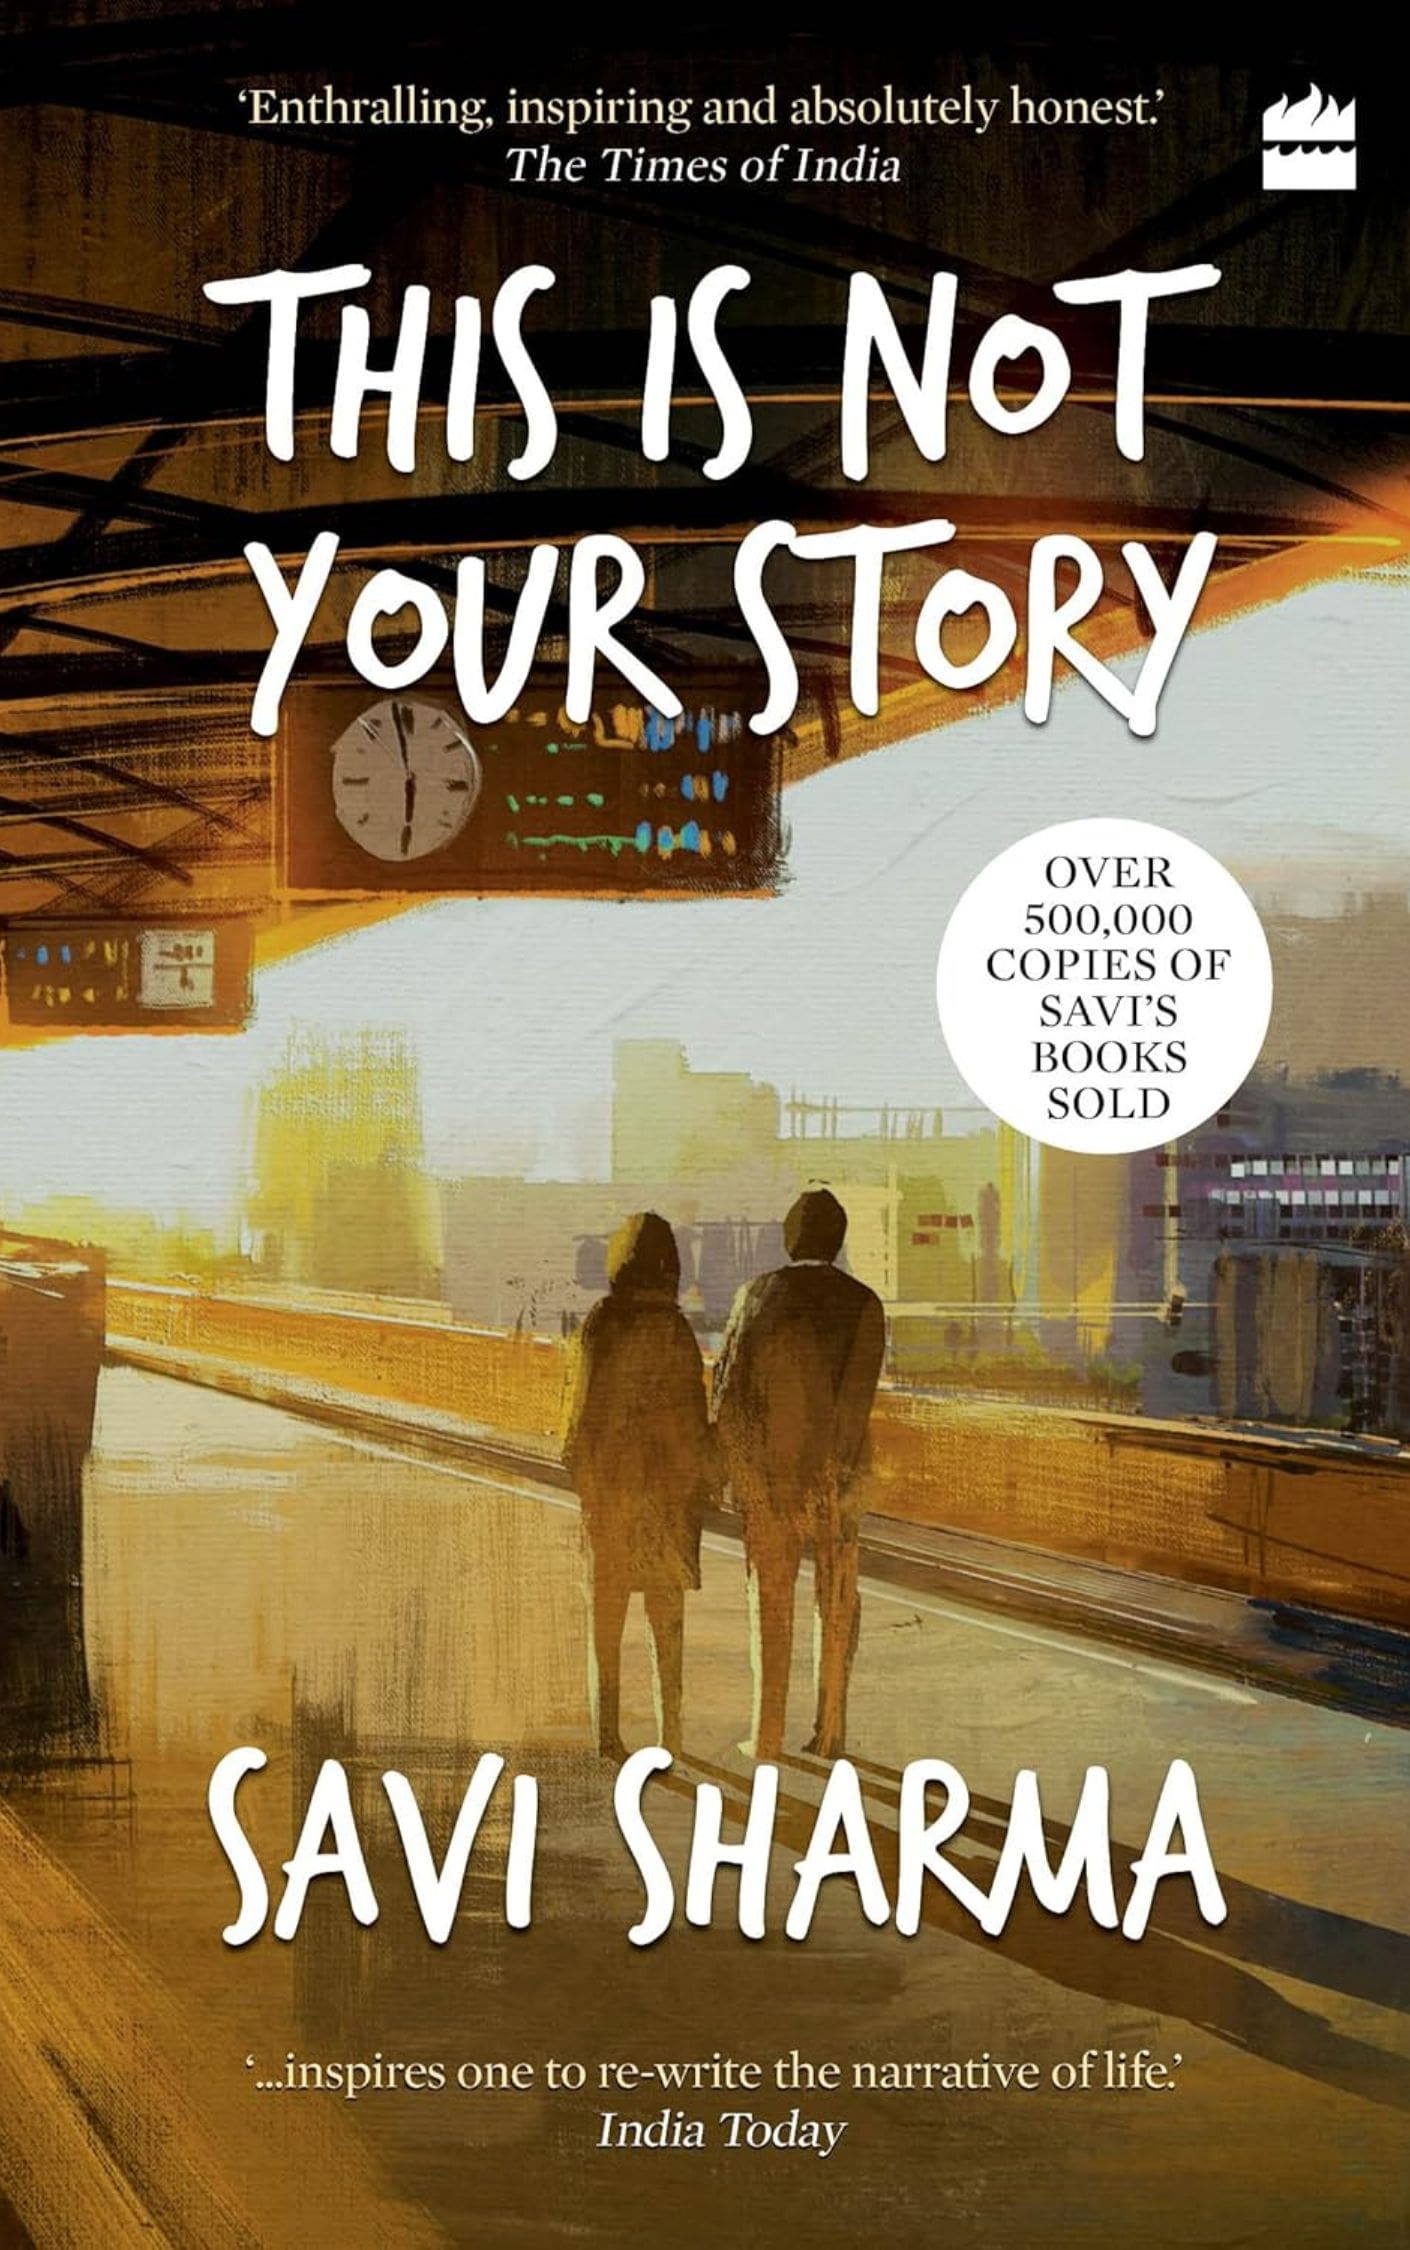 This Is Not Your Story